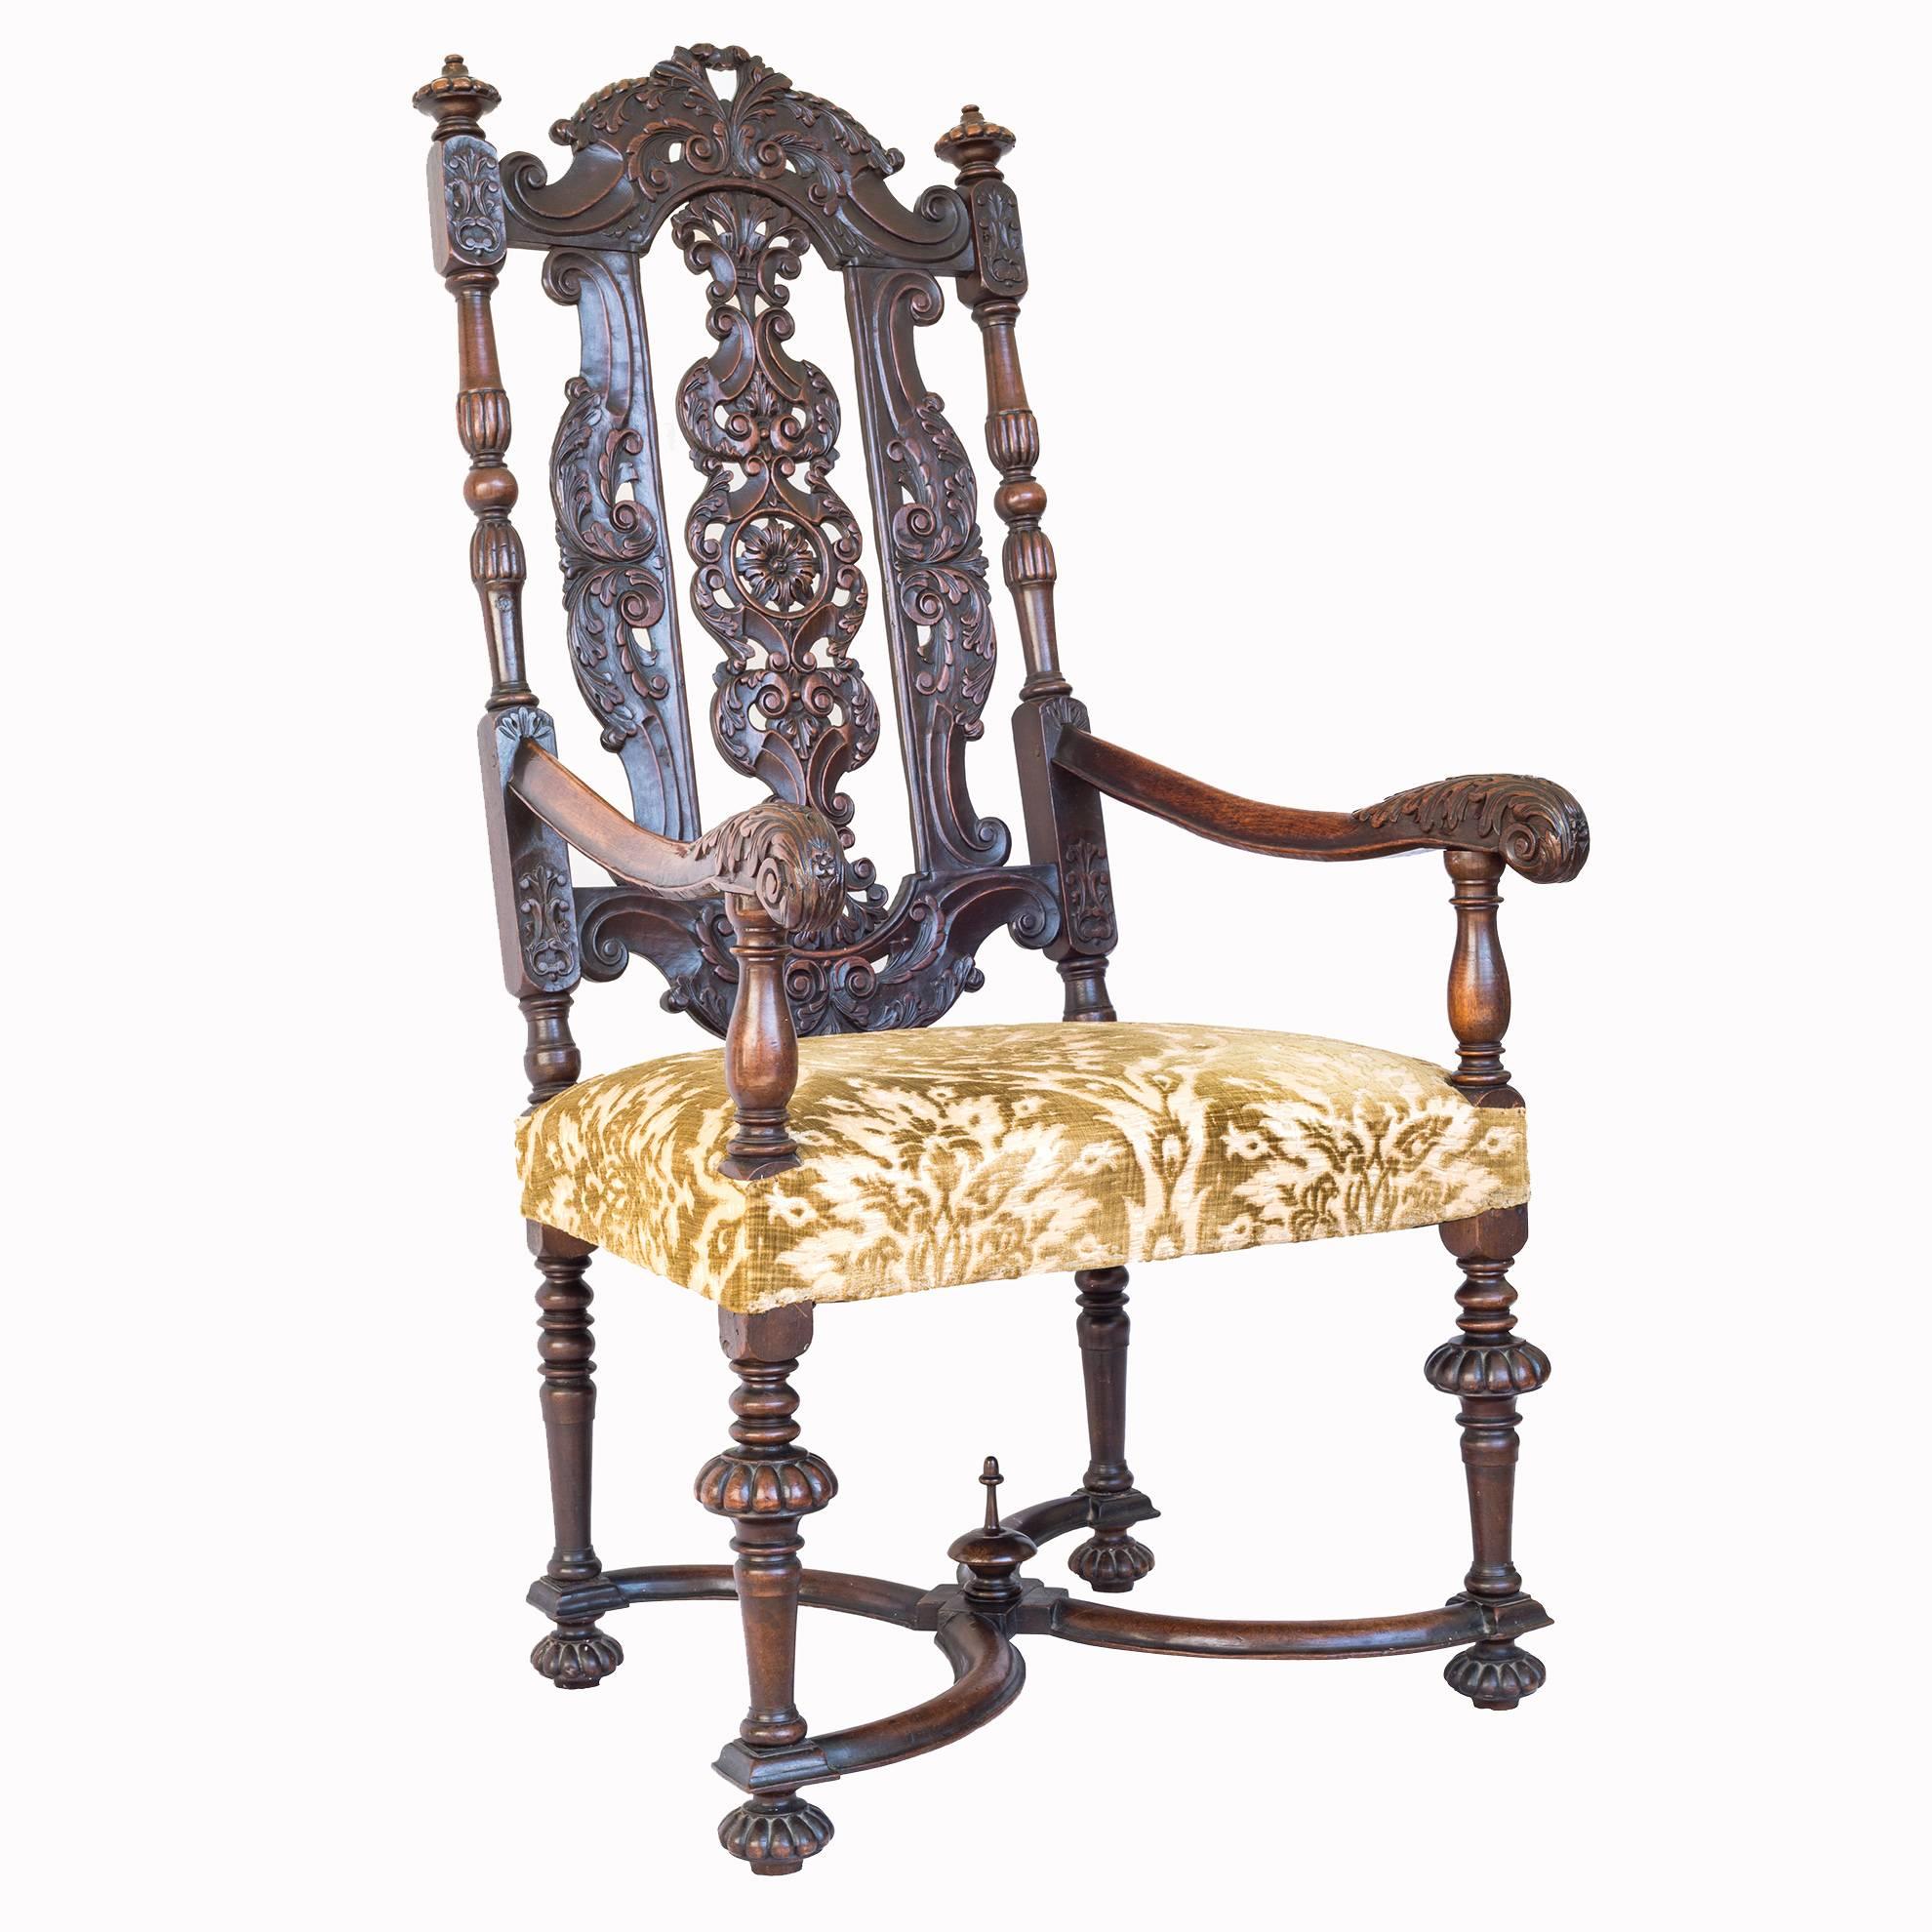 A superb late 17th century Flemish style high-back armchair in walnut, richly carved in the taste of Daniel Marot.

English, circa 1890.

The profusely carved and pierced back, acanthus leaf decorated arms, above the stuff-over seat covered in